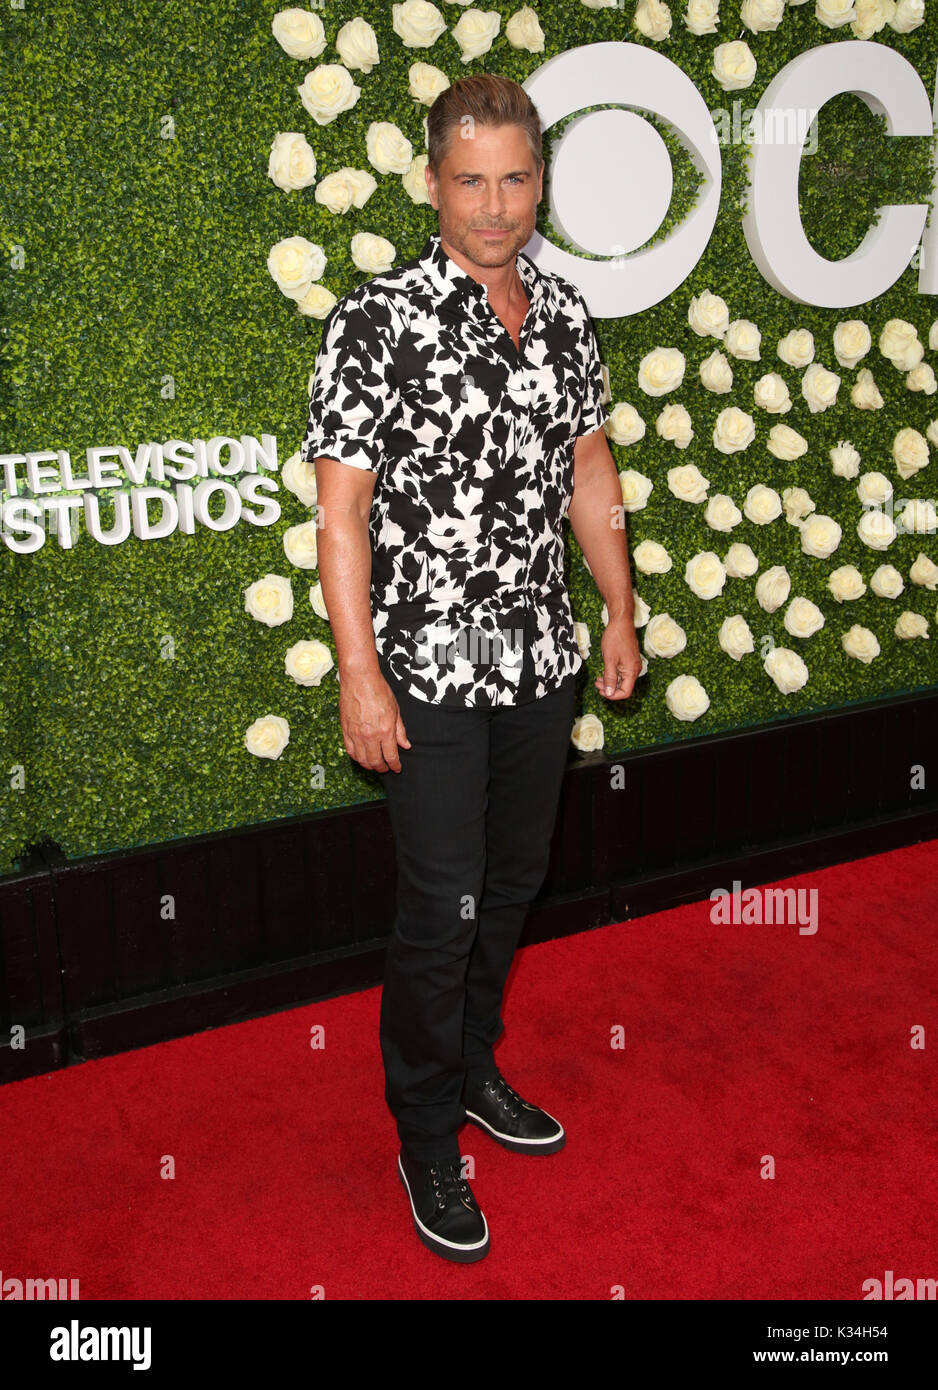 Celebrities attend the CBS Television Studios' Summer Soiree during the 2017 Summer TCA Tour in Studio City  Featuring: Rob Lowe Where: Los Angeles, California, United States When: 02 Aug 2017 Credit: Brian To/WENN.com Stock Photo